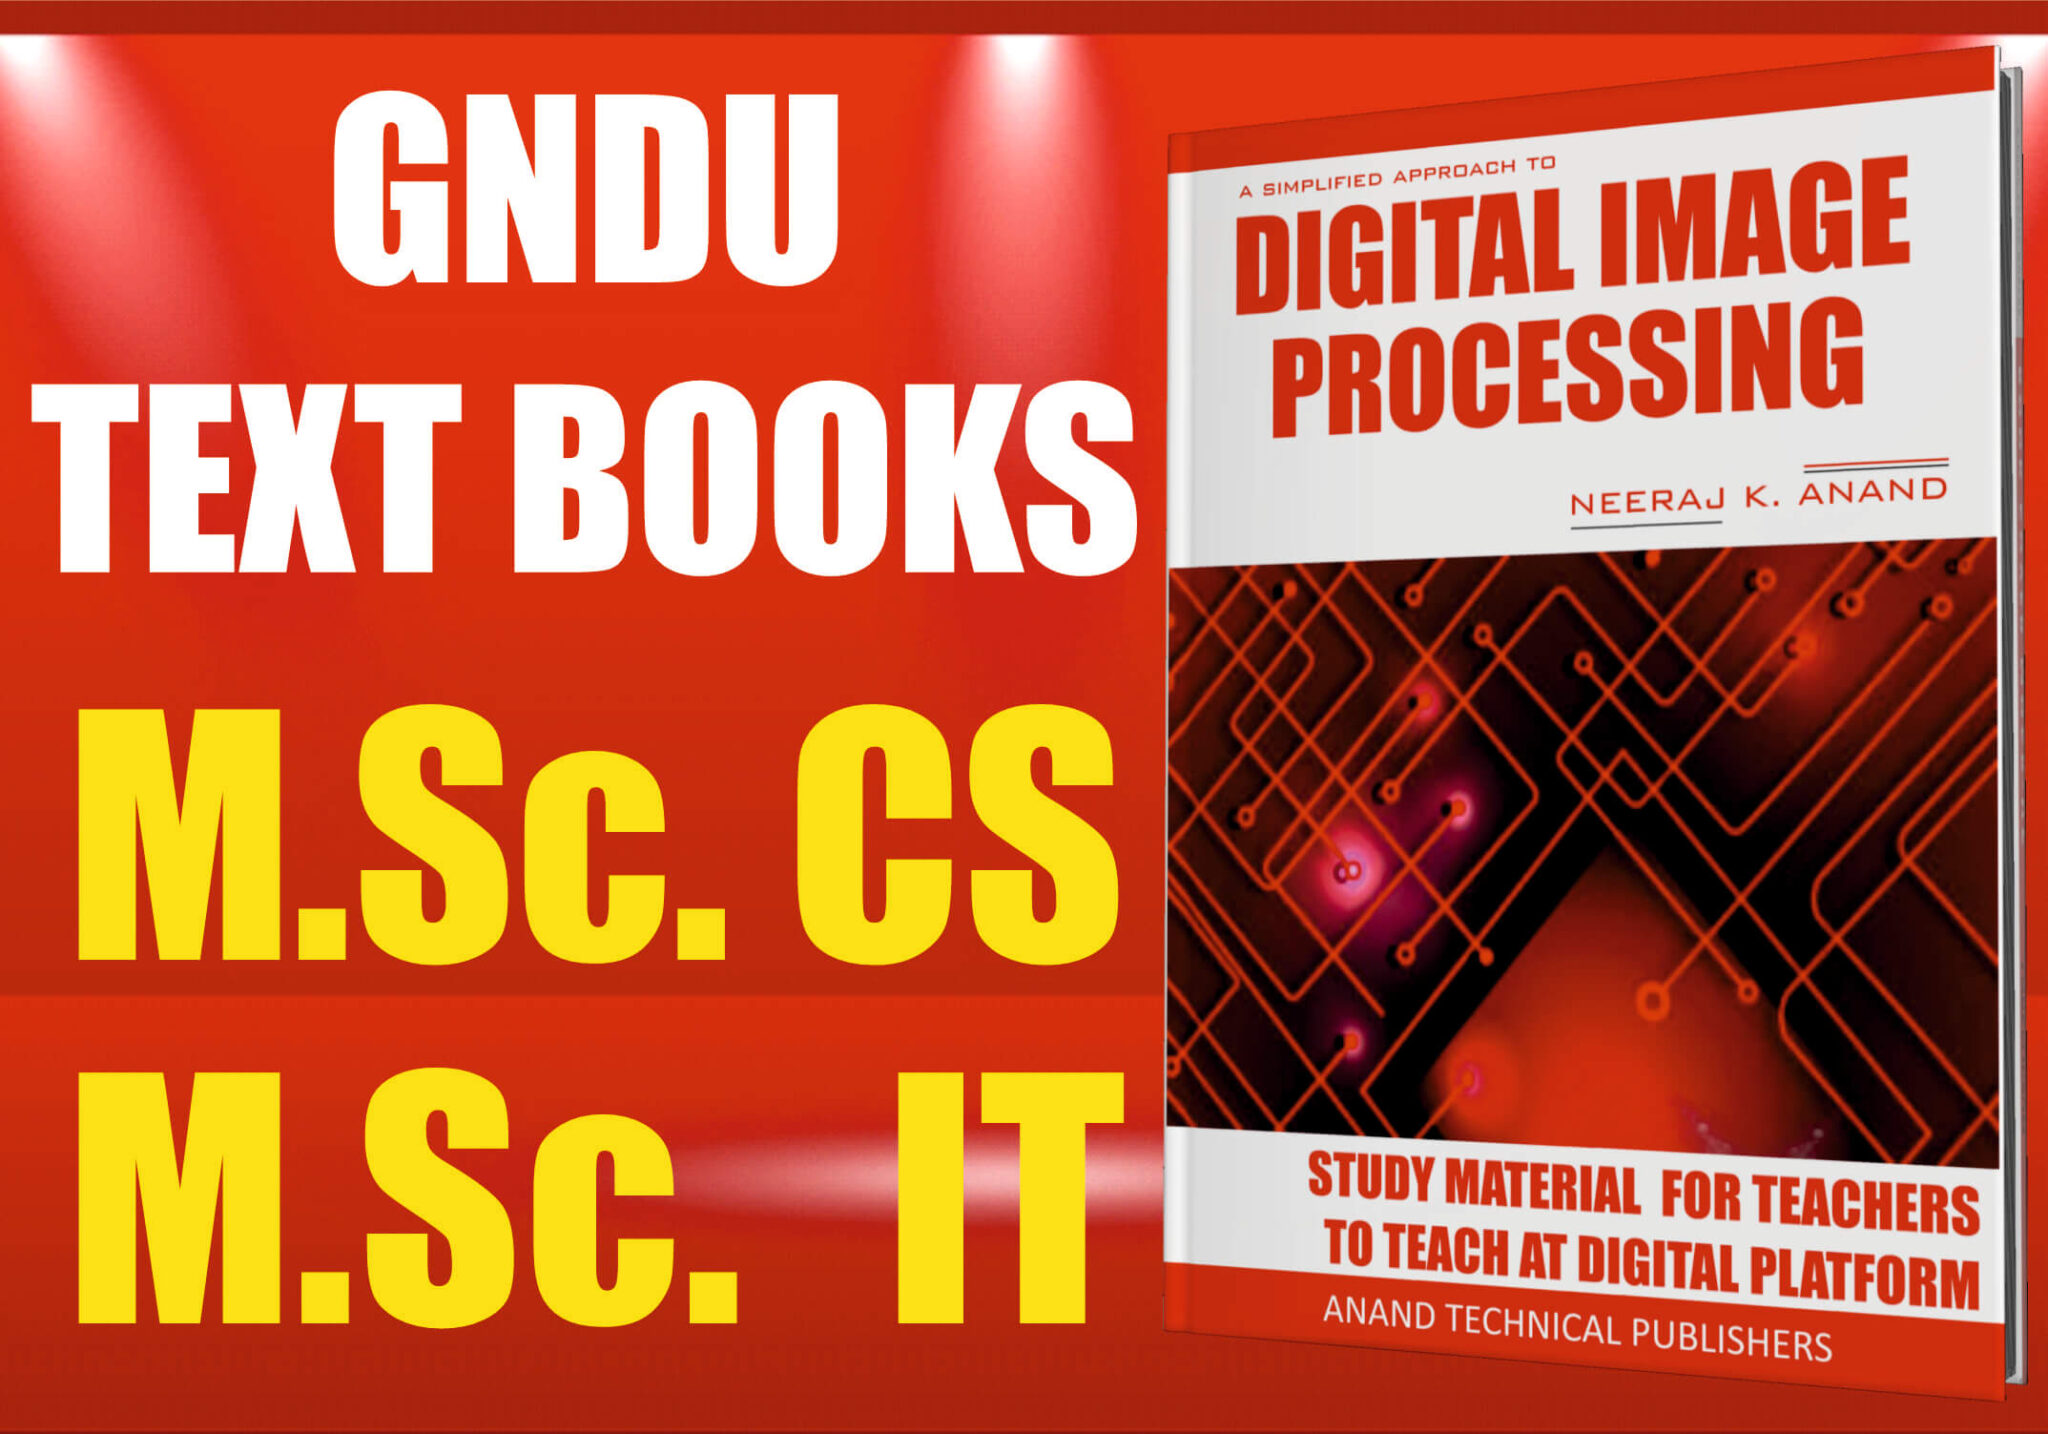 Digital Image Processing|Introduction To Image Processing System|GNDU MSc Computer Science IT Lecture Notes EBooks pdf online Download|Anand Technical Publishers|Neeraj K Anand|PARAM ANAND